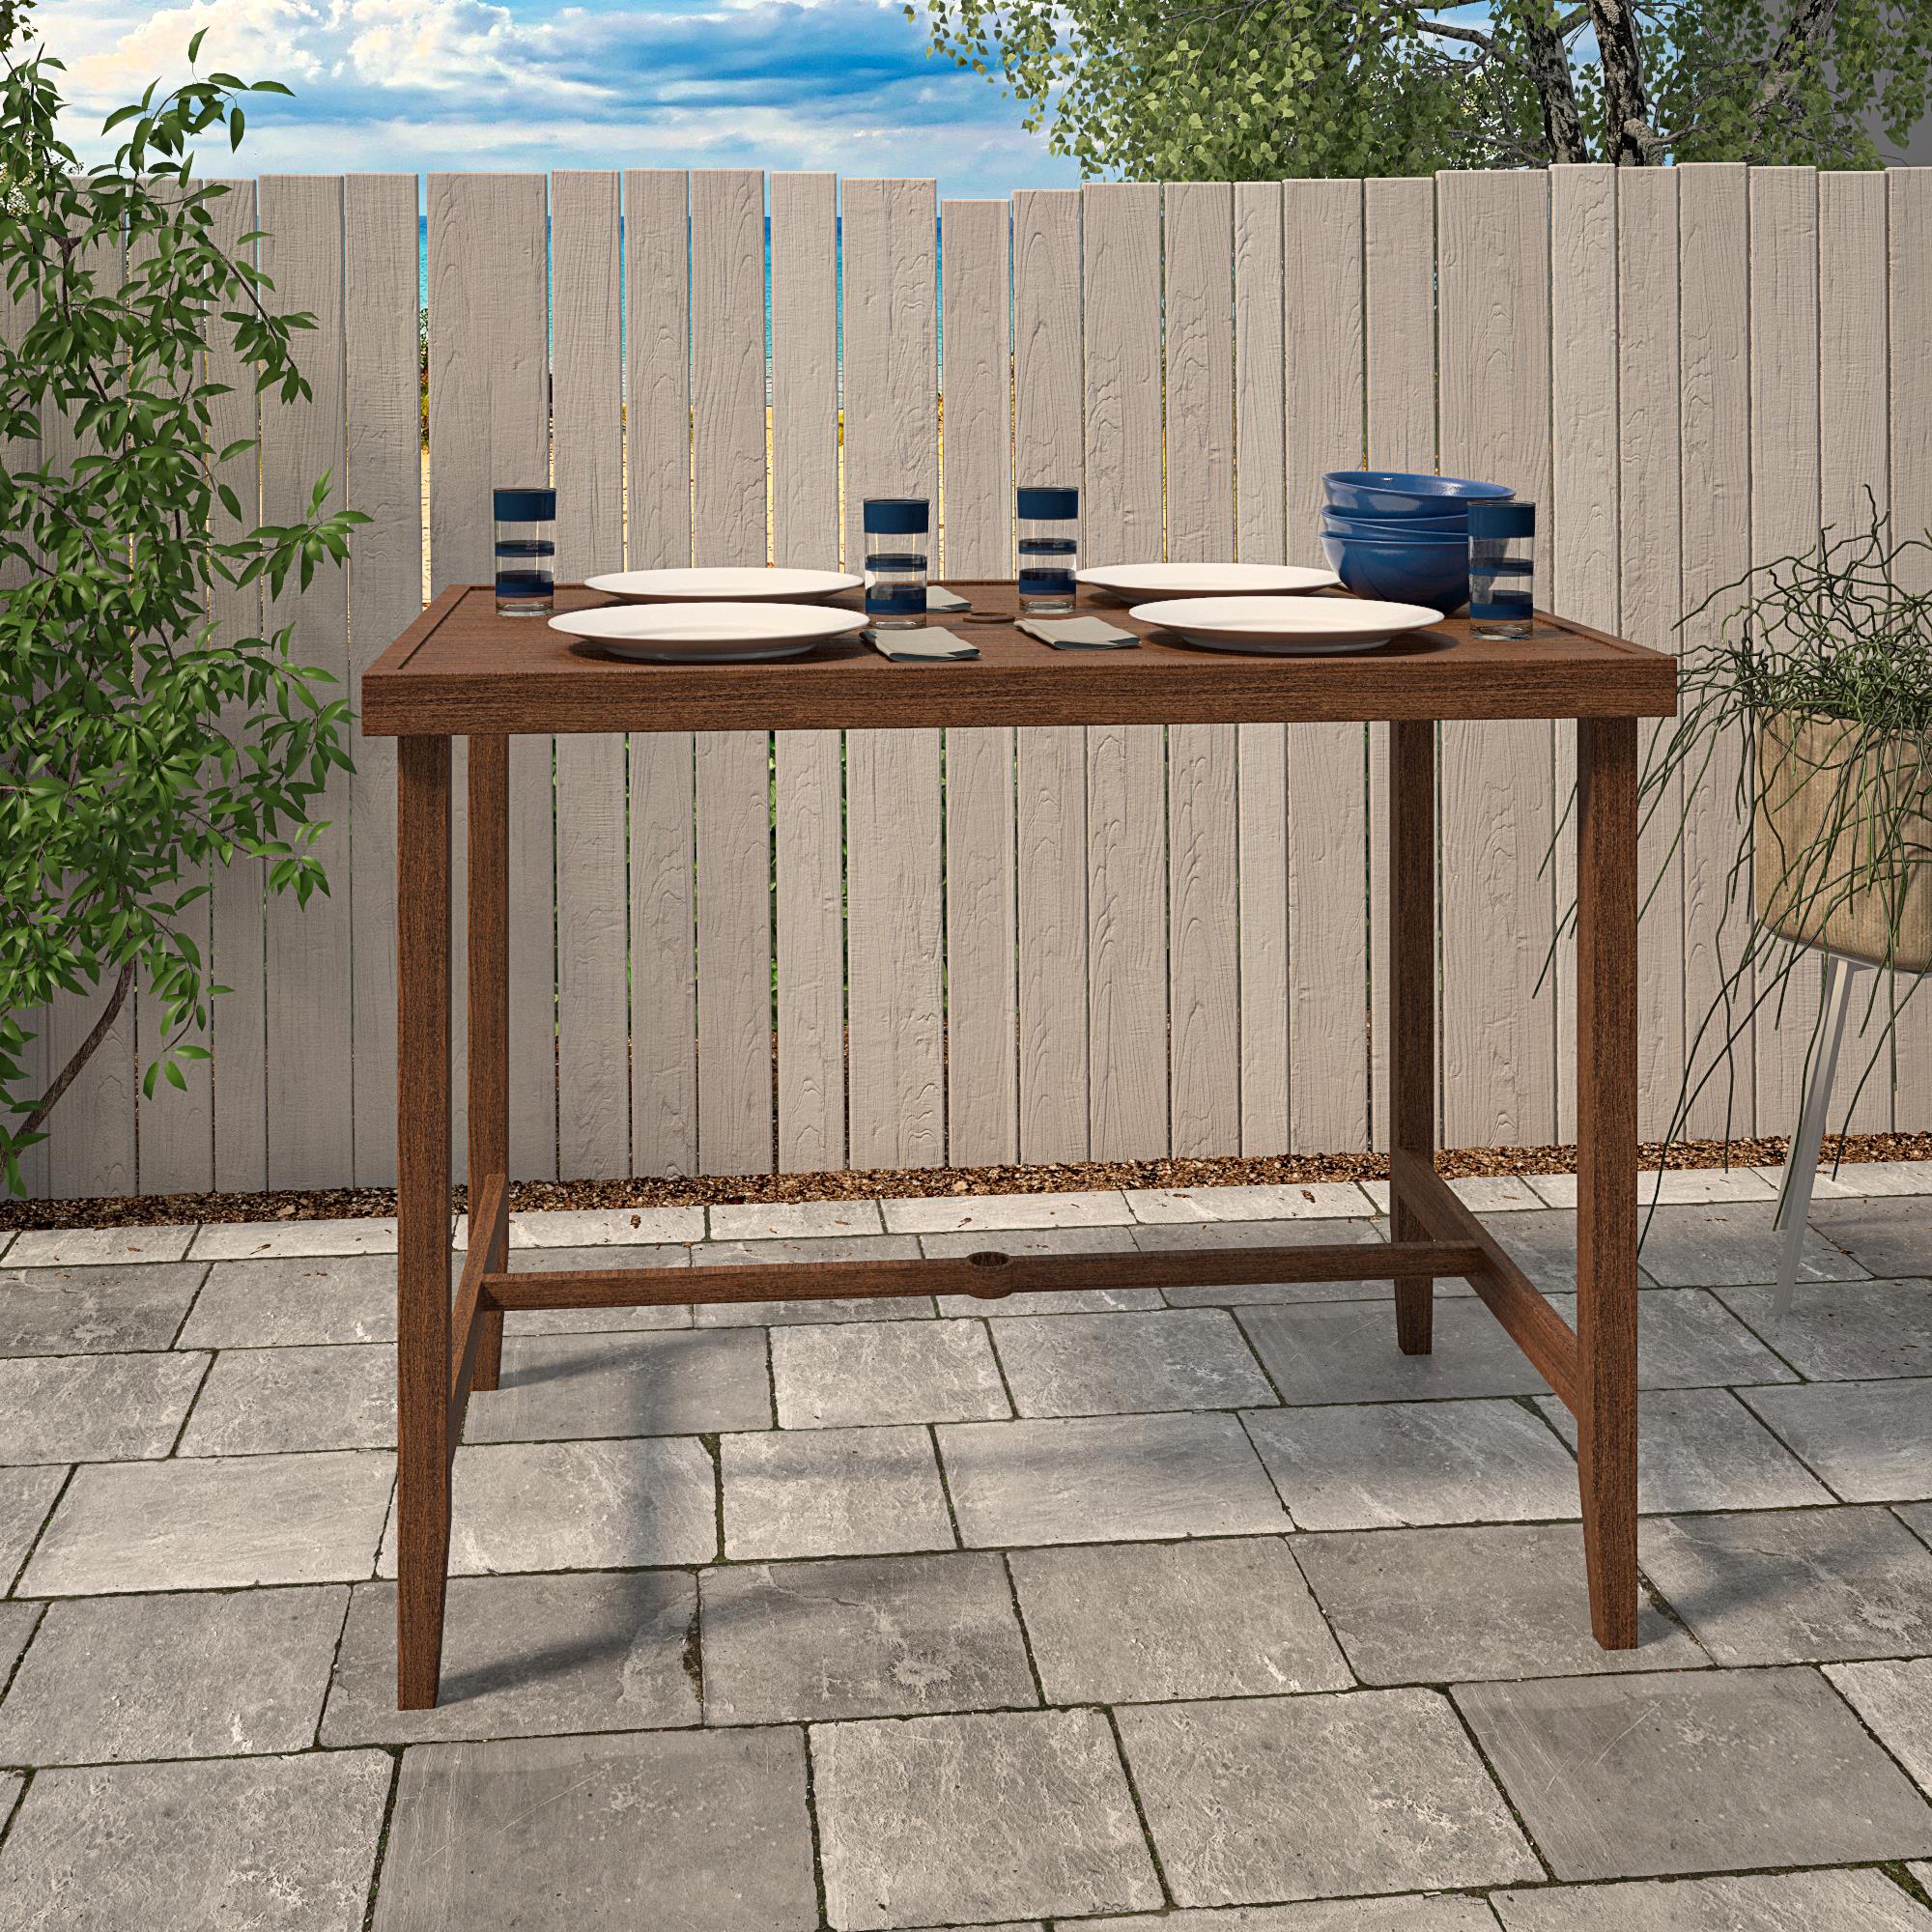 COSCO Outdoor Living, Patio Bar Table, Steel, Brown - image 1 of 8